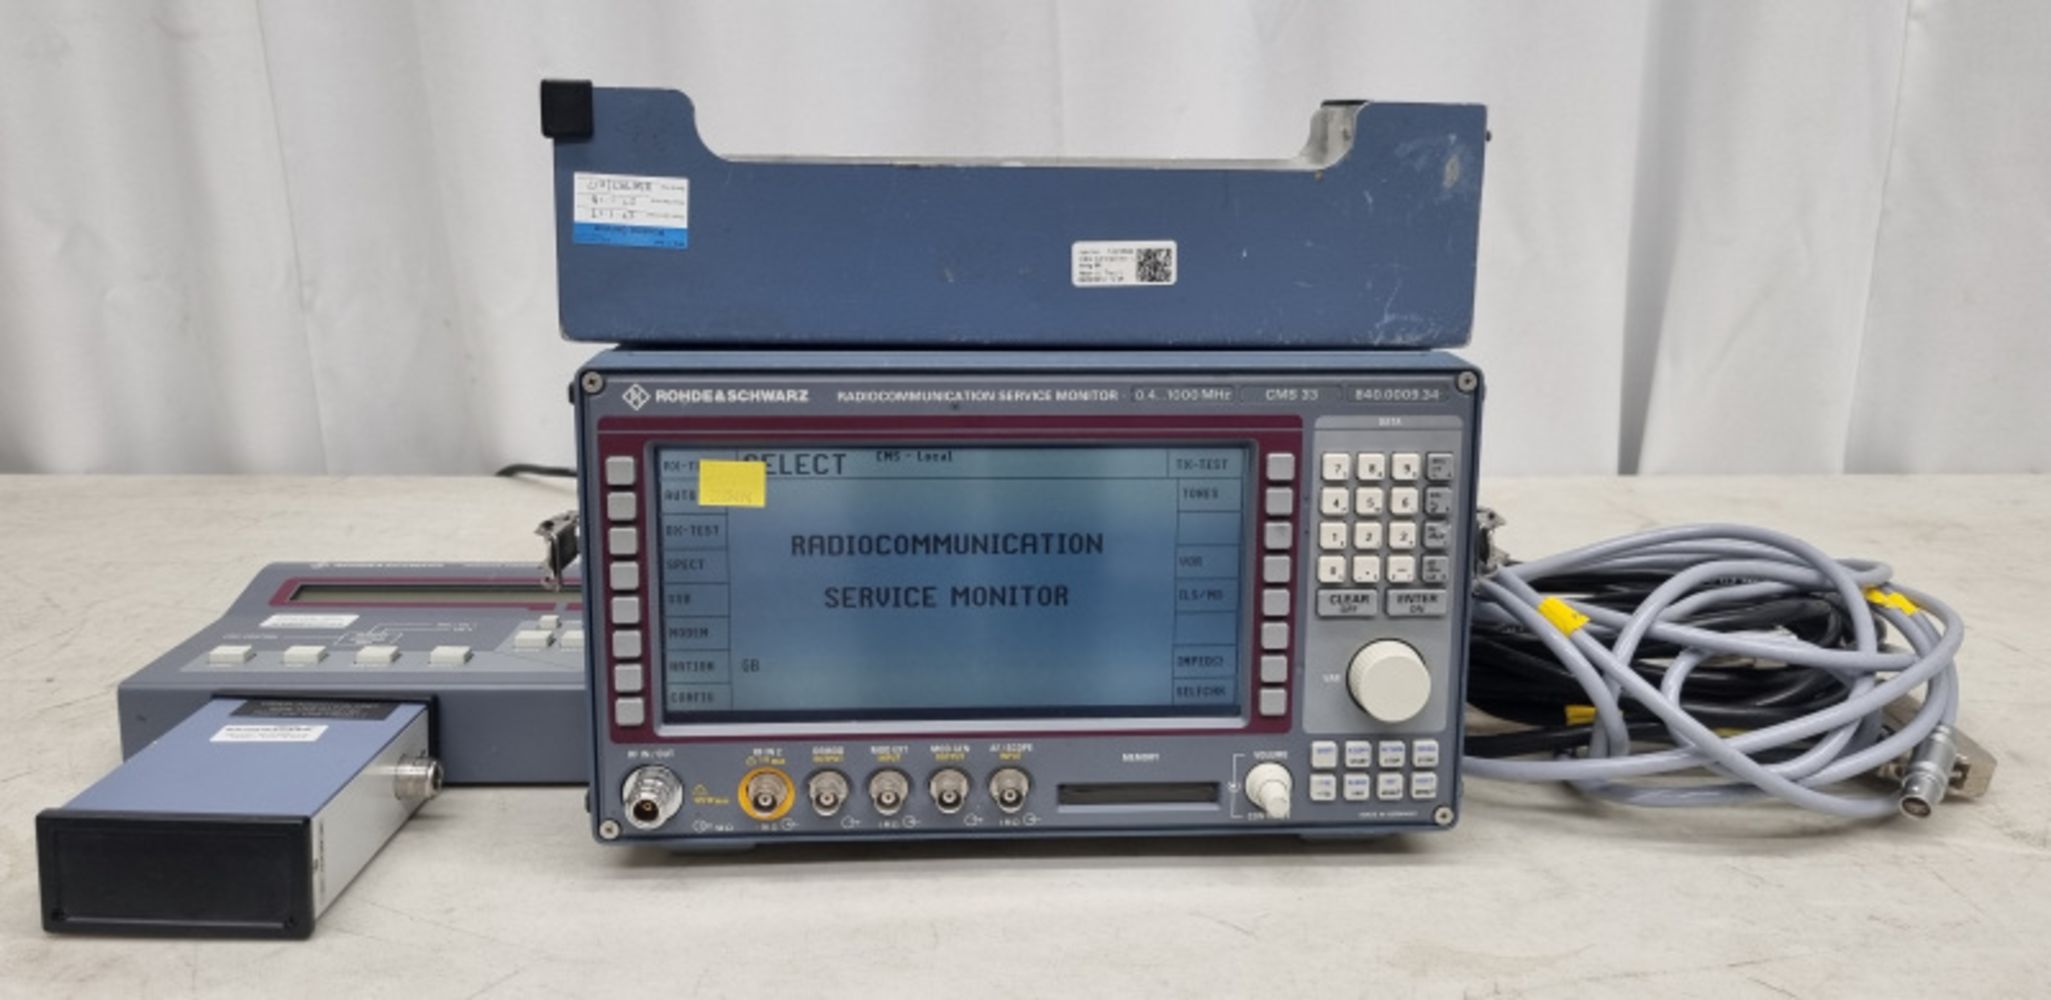 Online Auction of Rohde & Schwarz CMS33 Radio Comms Test Sets